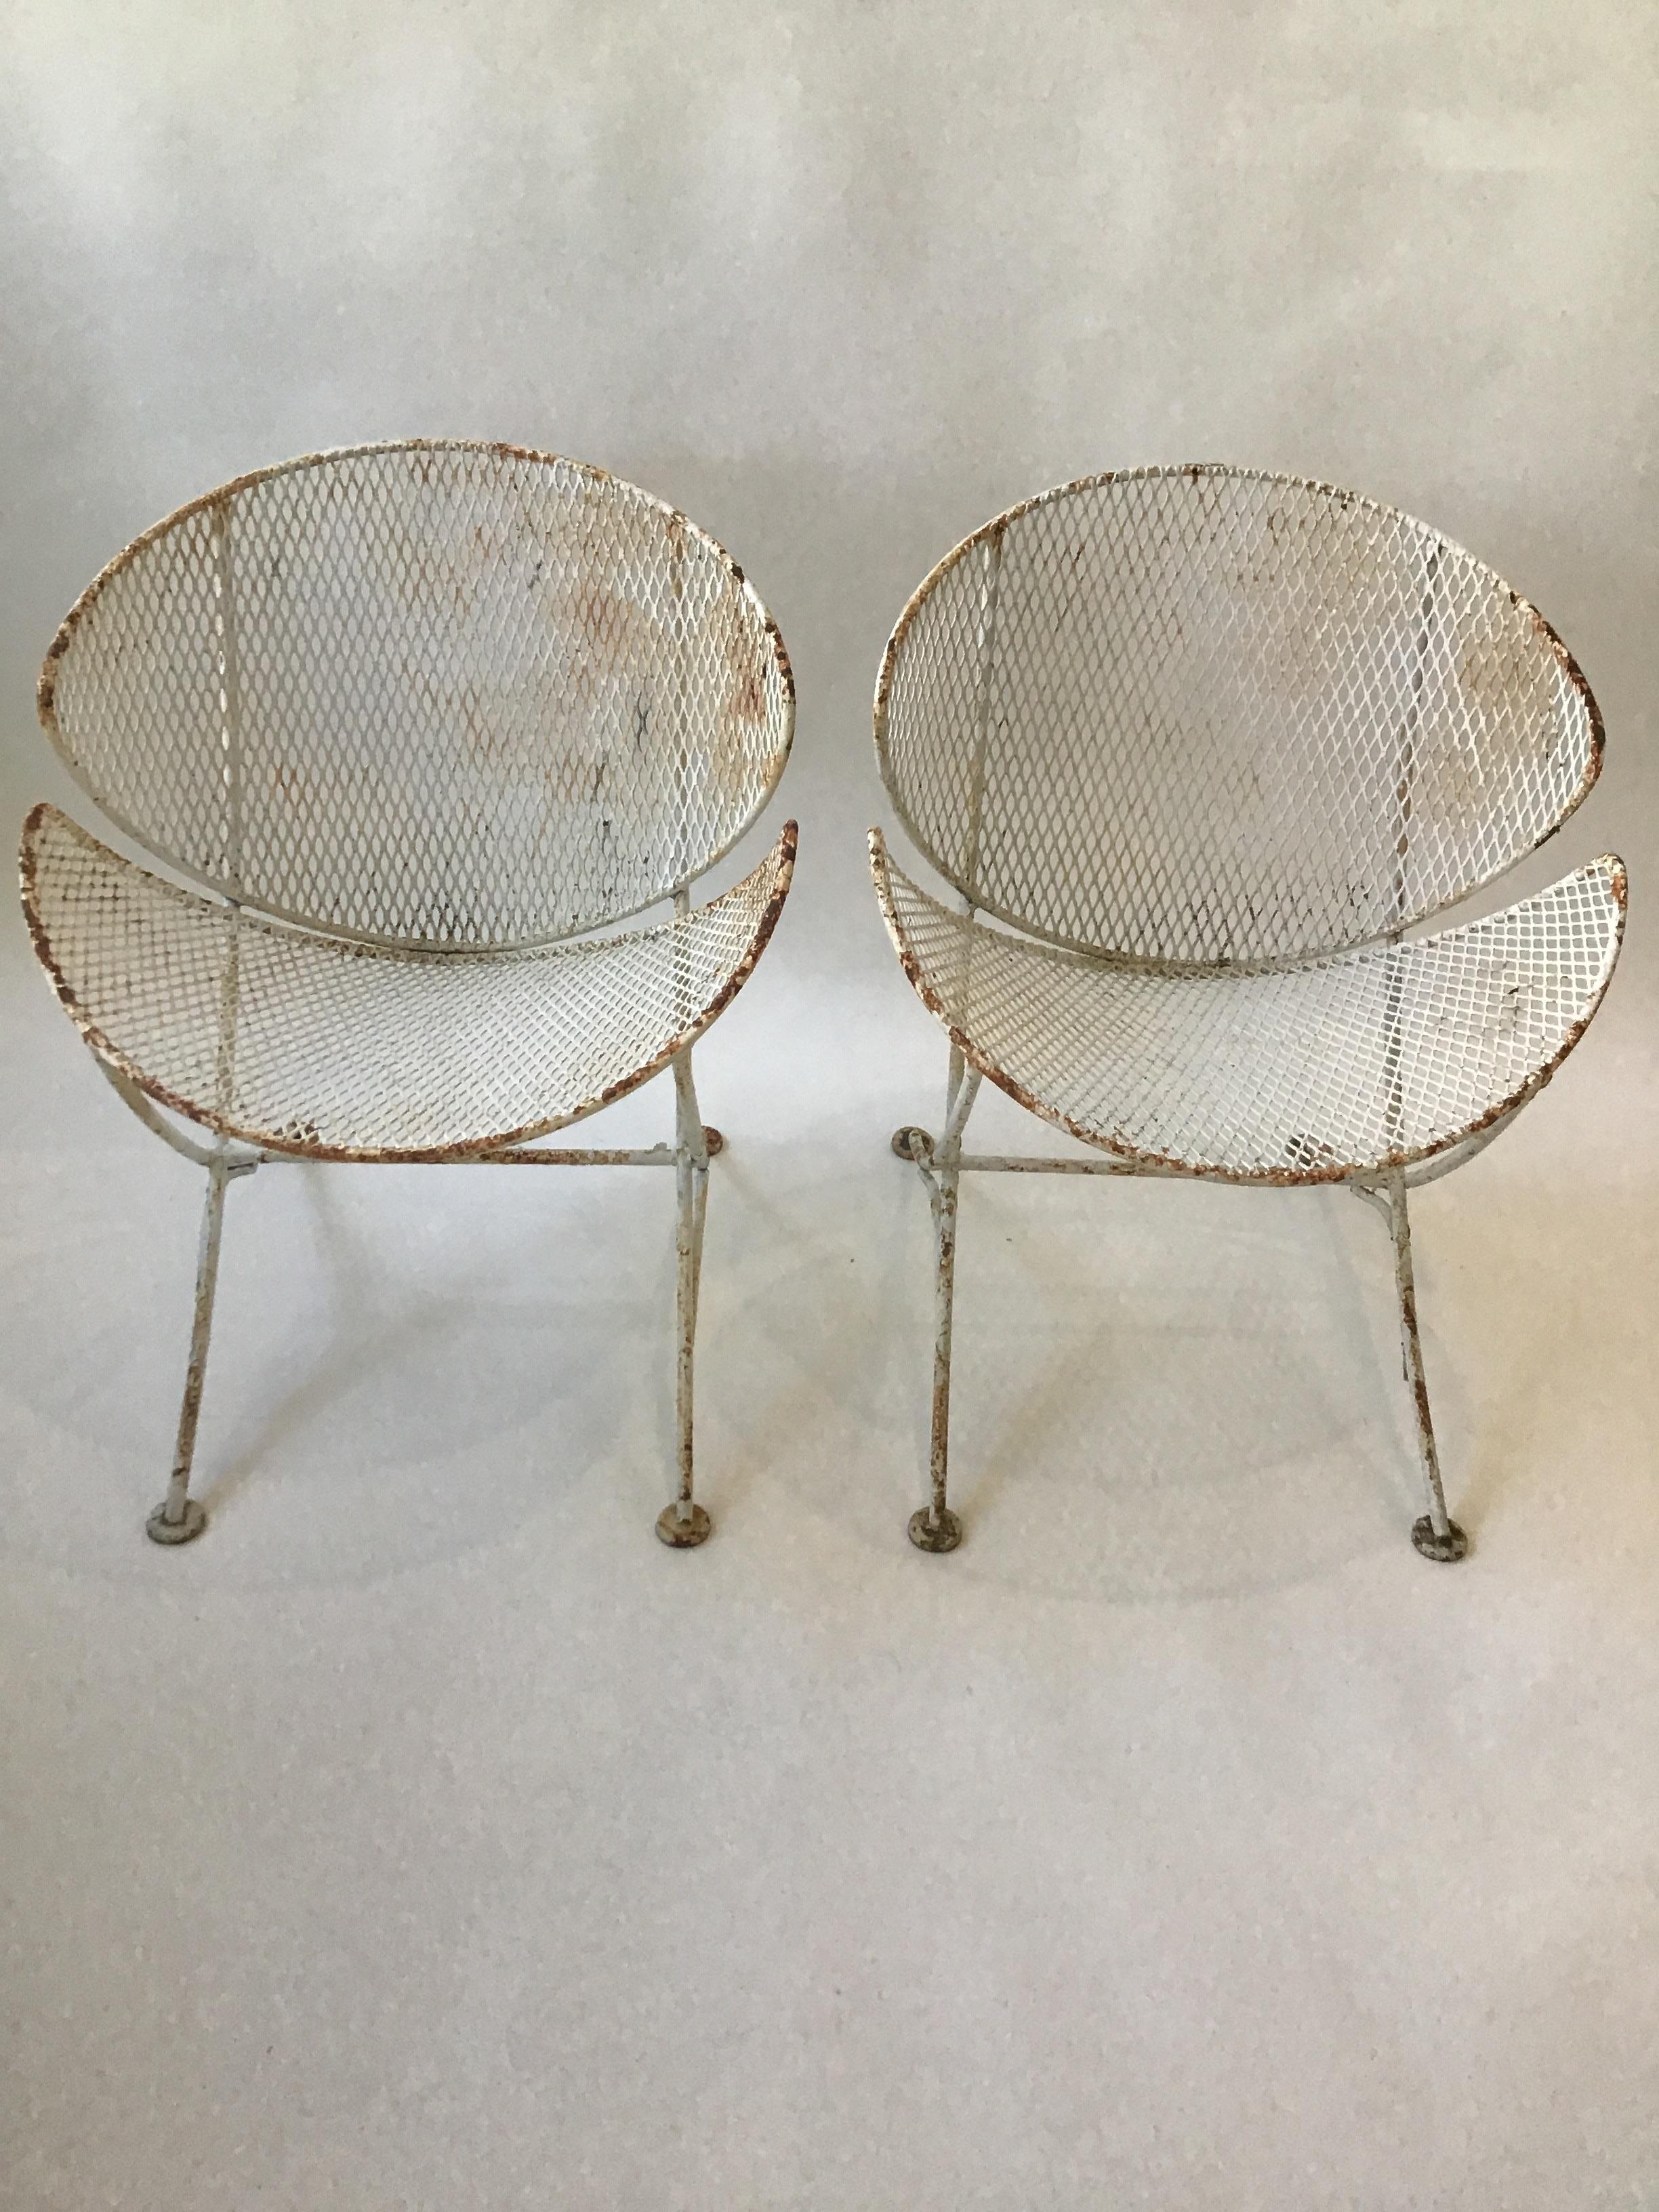 Pair of Salterini clam shell chairs. Needs to be repainted.